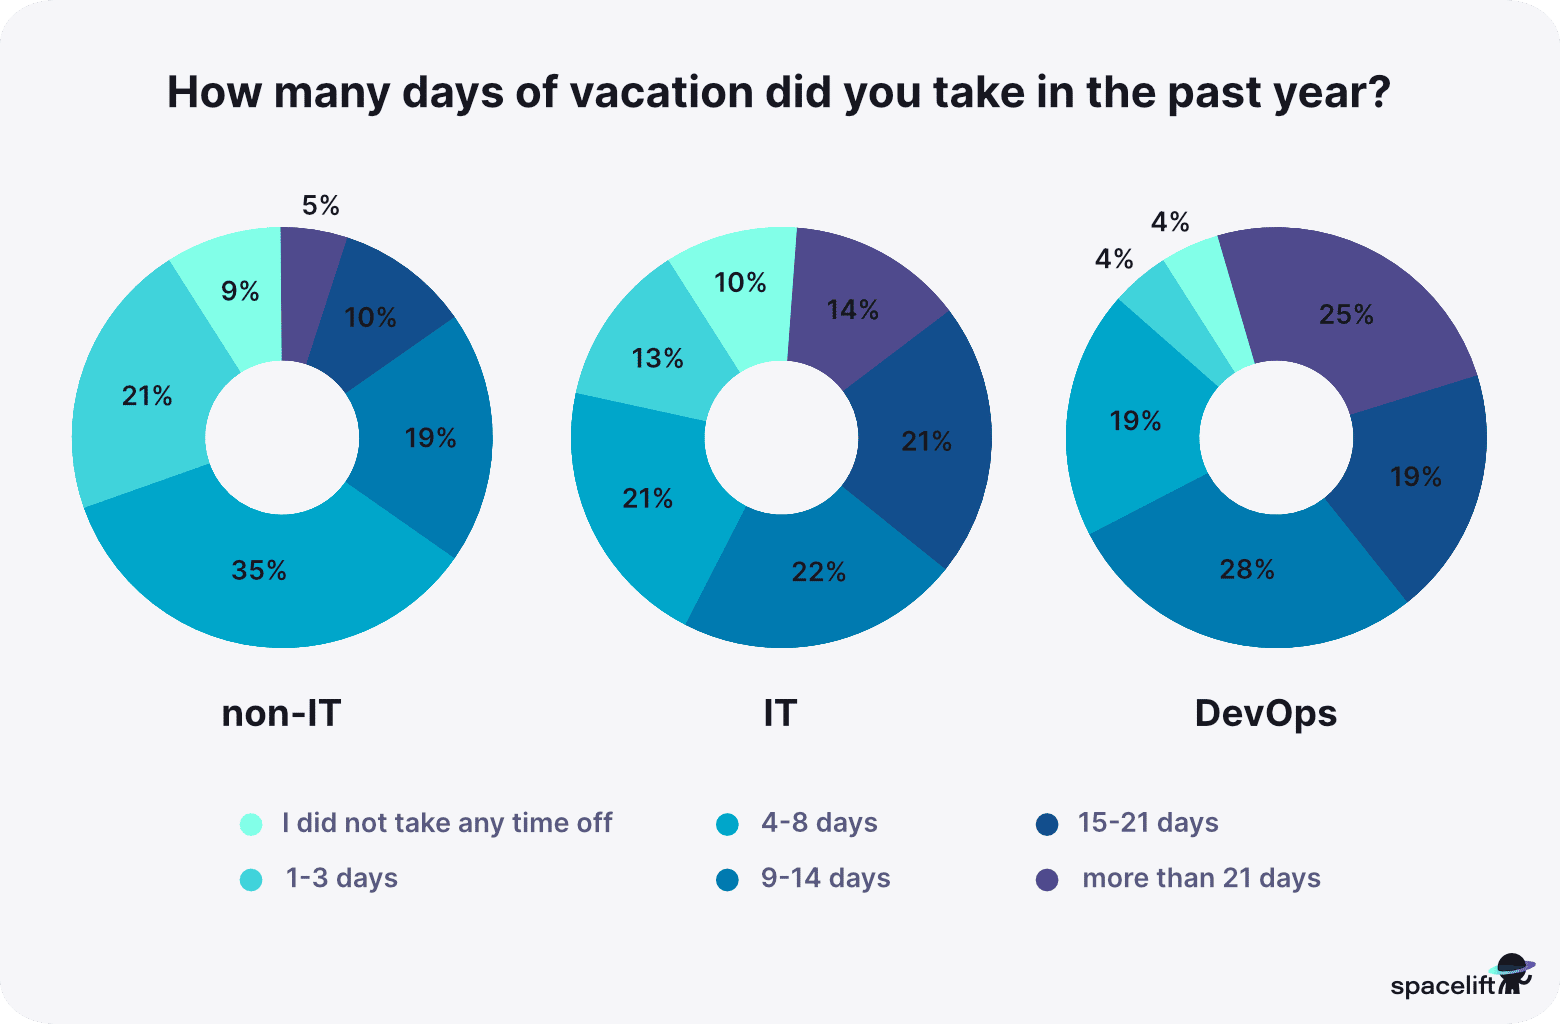 Vacation days taken - stress in IT report